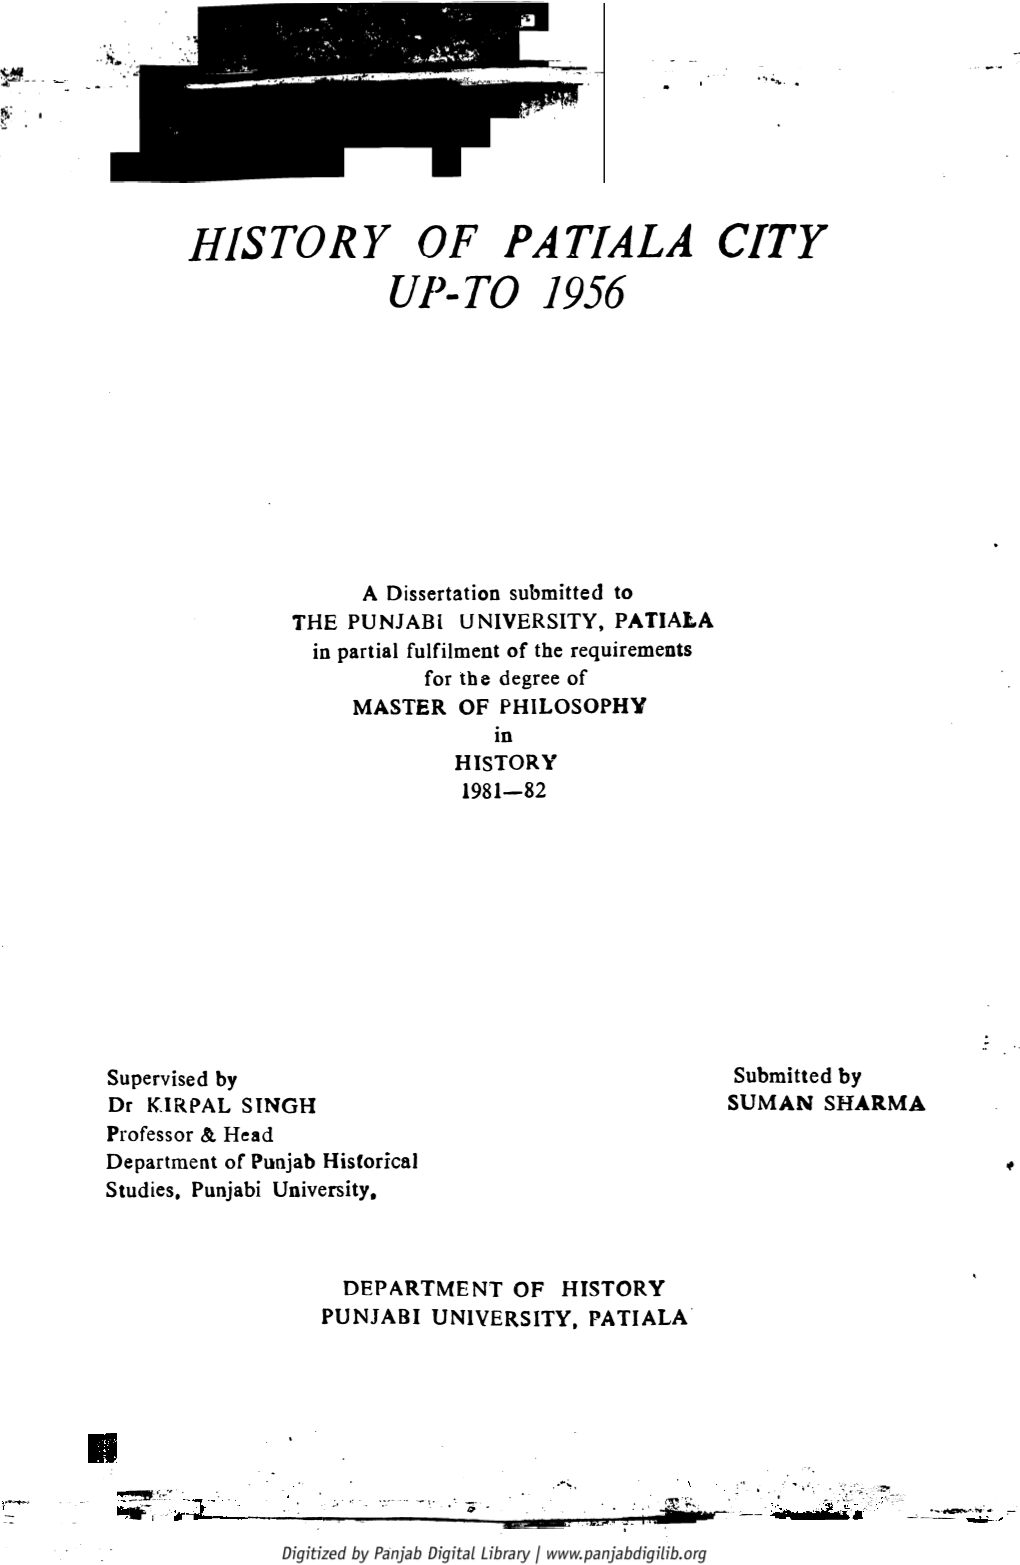 A Dissertation Submitted to the PUNJABI UNIVERSITY, PATIALA in Partial Fulfilment O F the Requirements for the Degree of MASTER of PHILOSOPHY in 4 HISTORY 1981—82